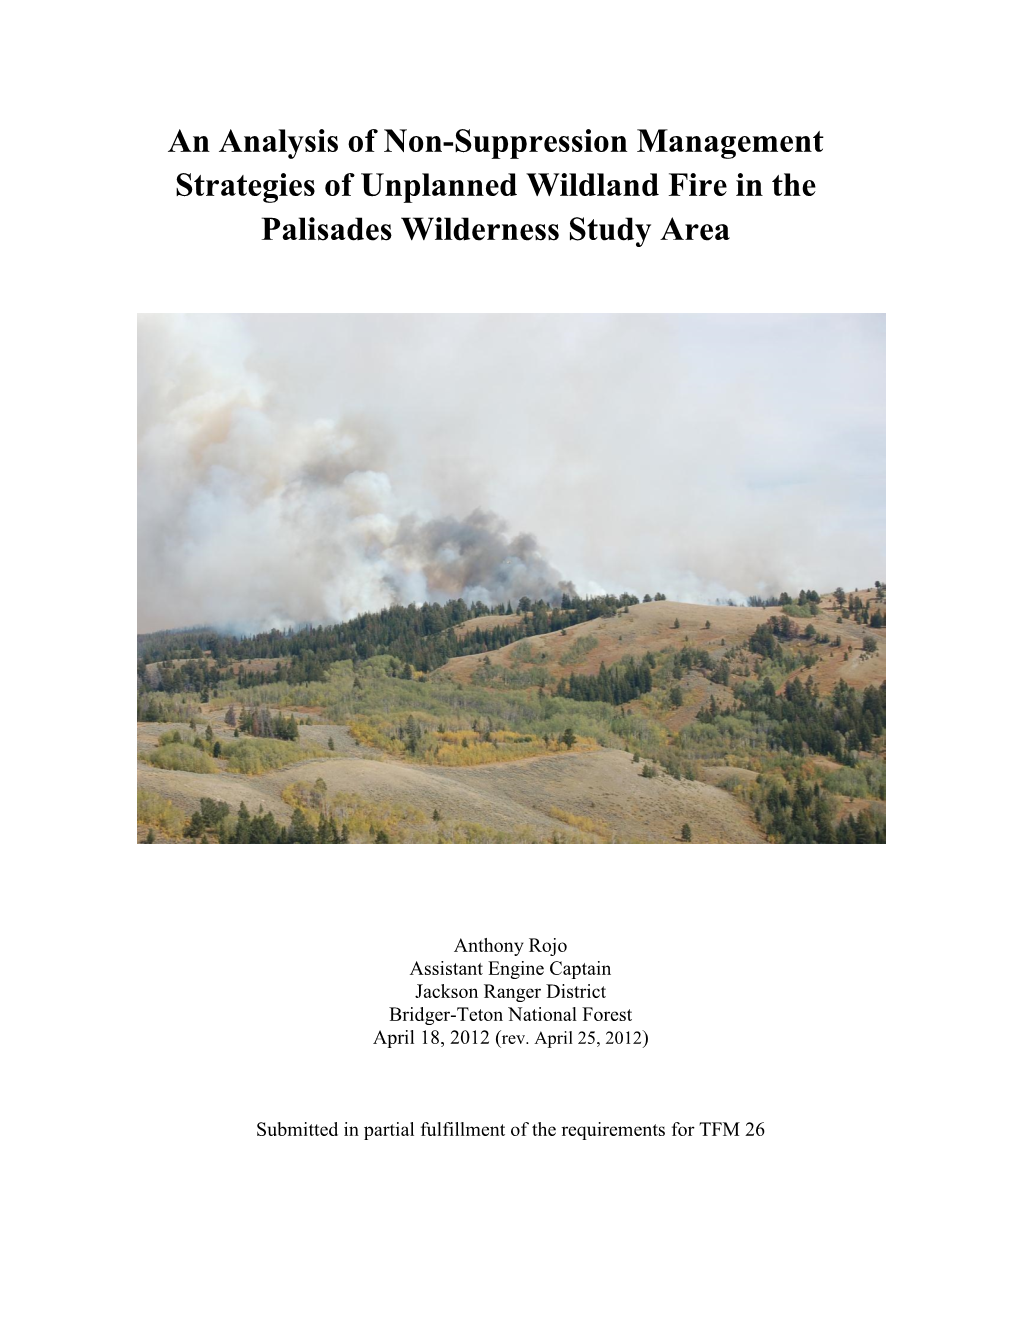 An Analysis of Non-Suppression Management Strategies of Unplanned Wildland Fire in the Palisades Wilderness Study Area